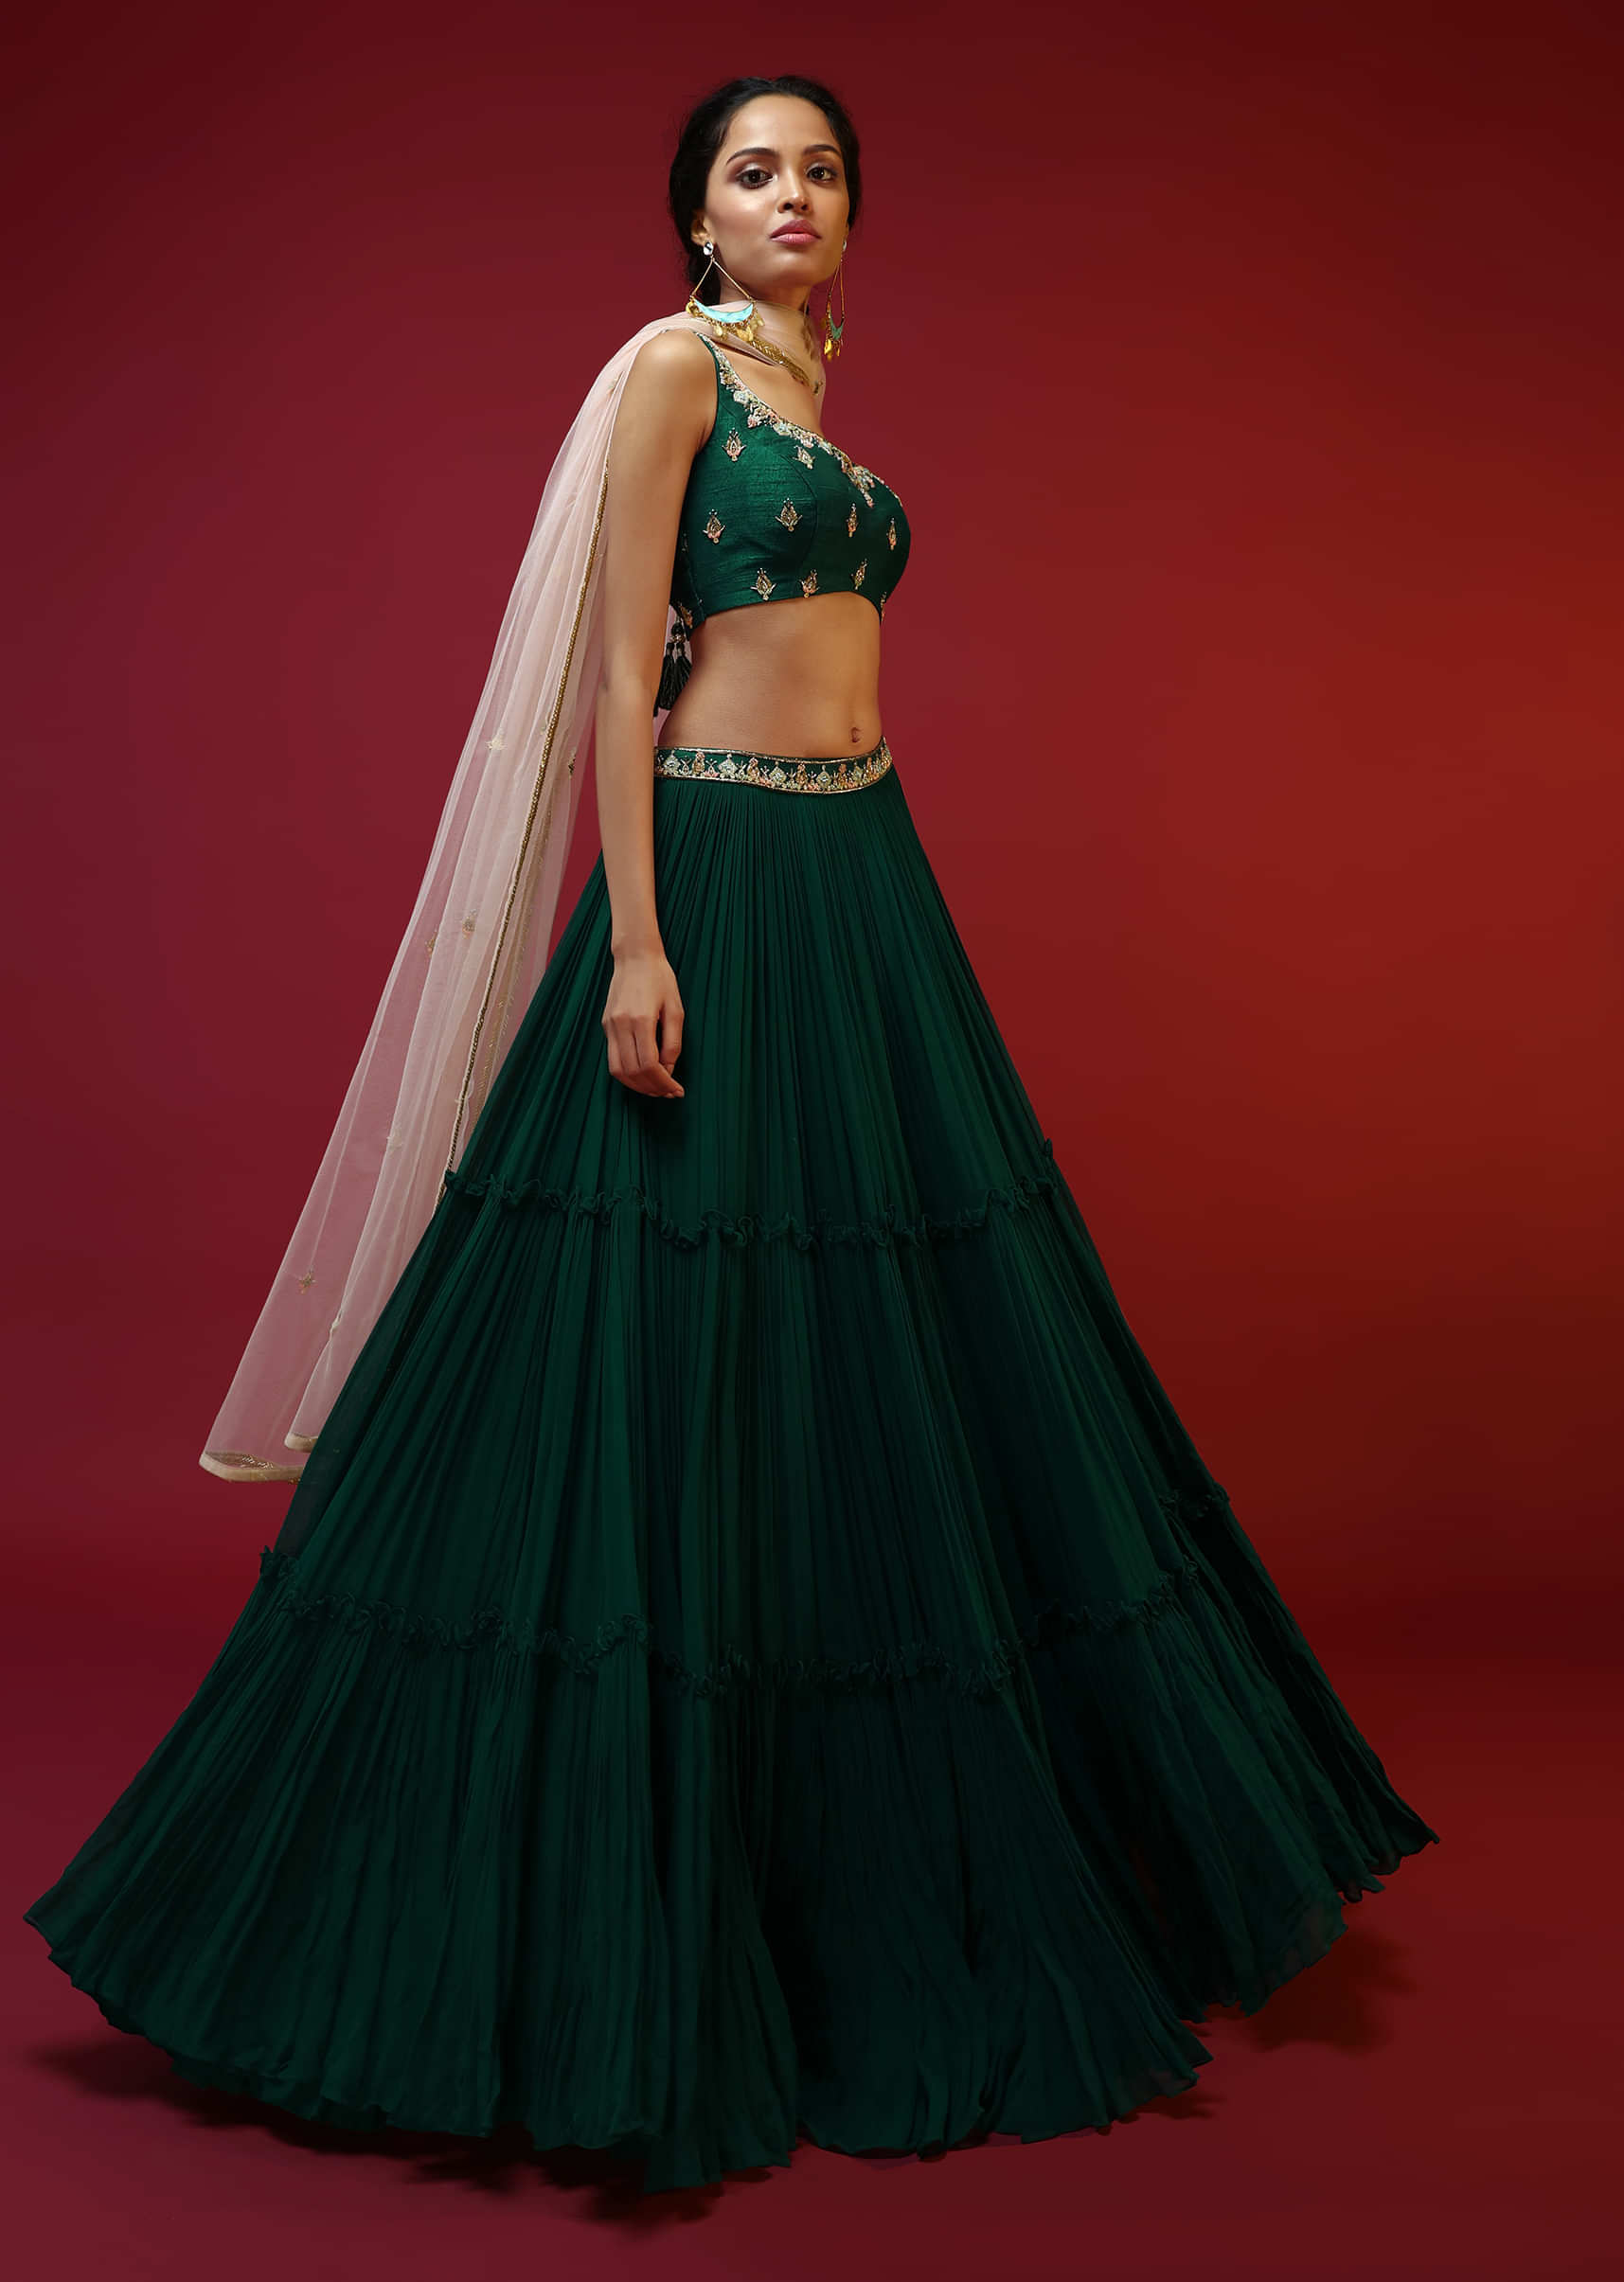 21+ Bottle Green Outfits For Bridesmaids That Are Spectacularly Elegant! |  WeddingBazaar